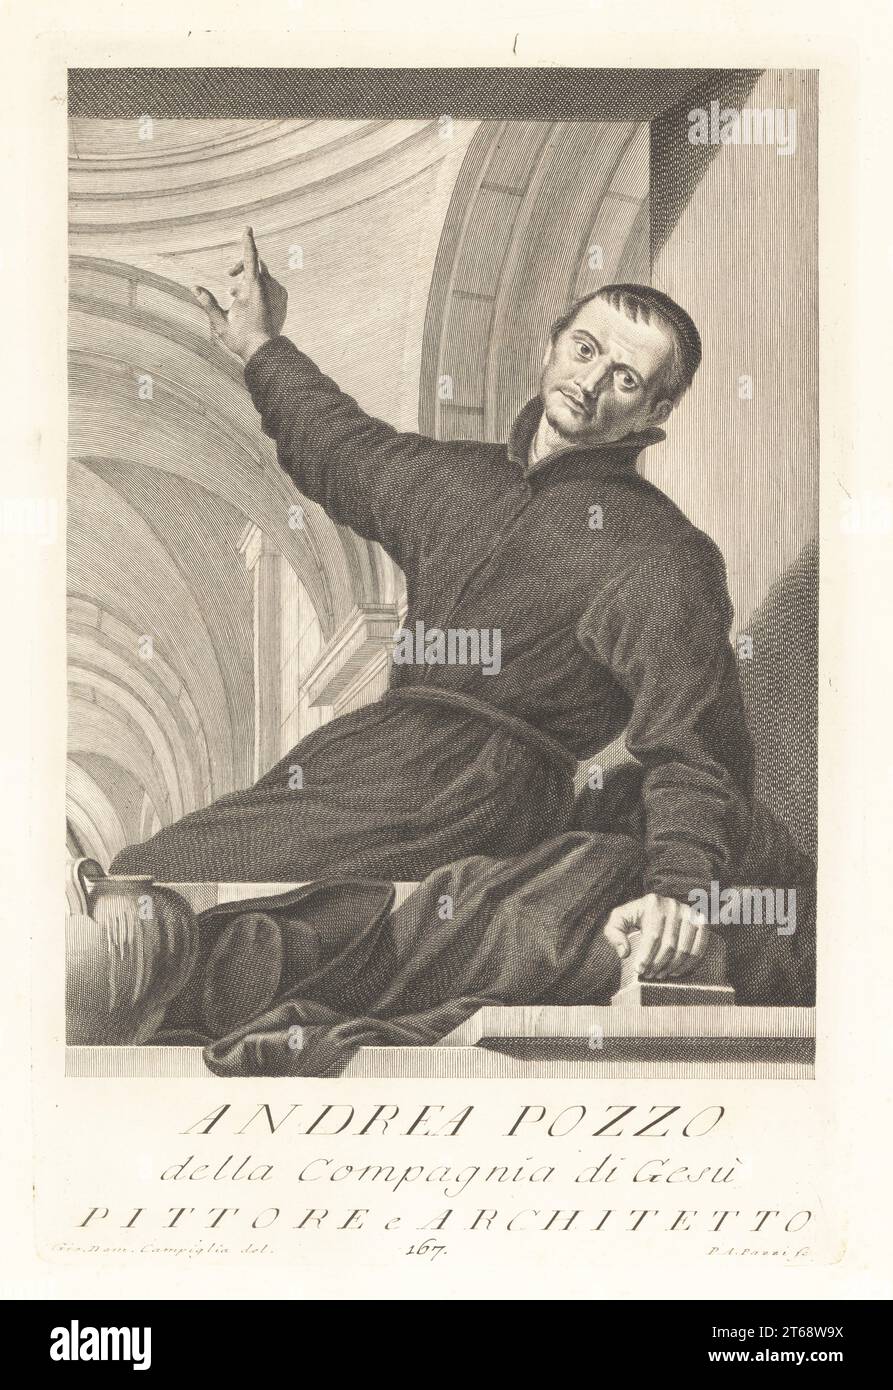 Andrea Pozzo, Italian Jesuit brother, Baroque painter, architect, decorator, stage designer, and art theoretician, 1642-1709. Painted the ceiling of the Church of Saint Ignatius of Loyola in Rome. Pittore. Copperplate engraving by Pietro Antonio Pazzi after Giovanni Domenico Campiglia after a self portrait by the artist from Francesco Moucke's Museo Florentino (Museum Florentinum), Serie di Ritratti de Pittori (Series of Portraits of Painters) stamperia Mouckiana, Florence, 1752-62. Stock Photo